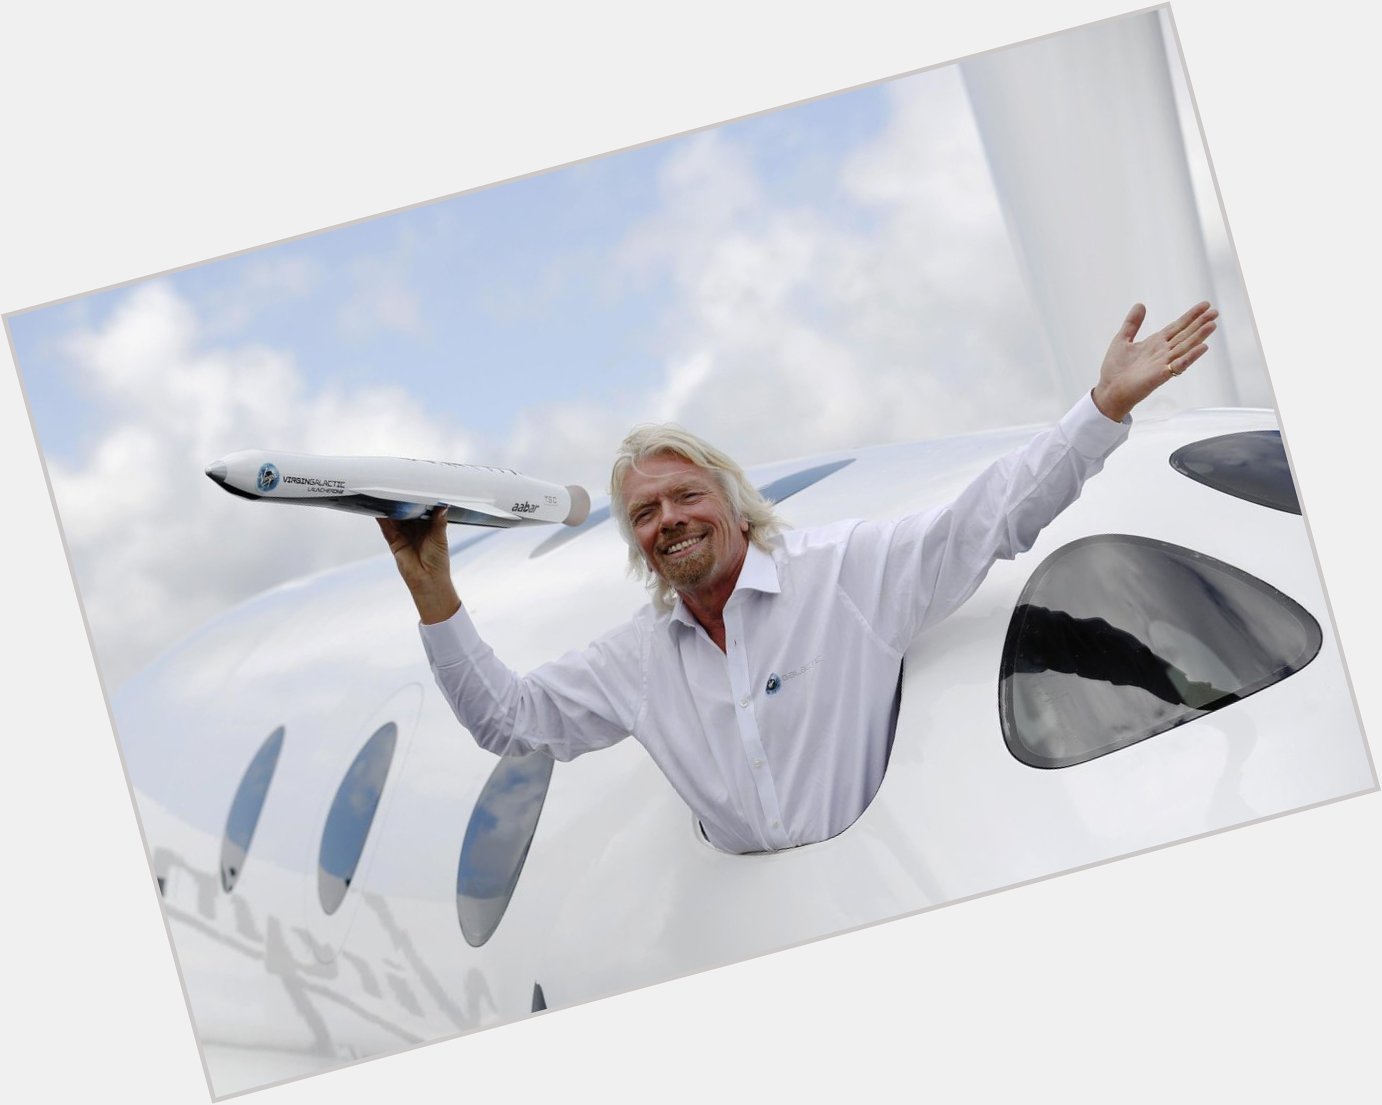 Wishing a very happy birthday to GZ signatory Here\s a picture of him doing Richard Branson stuff. 